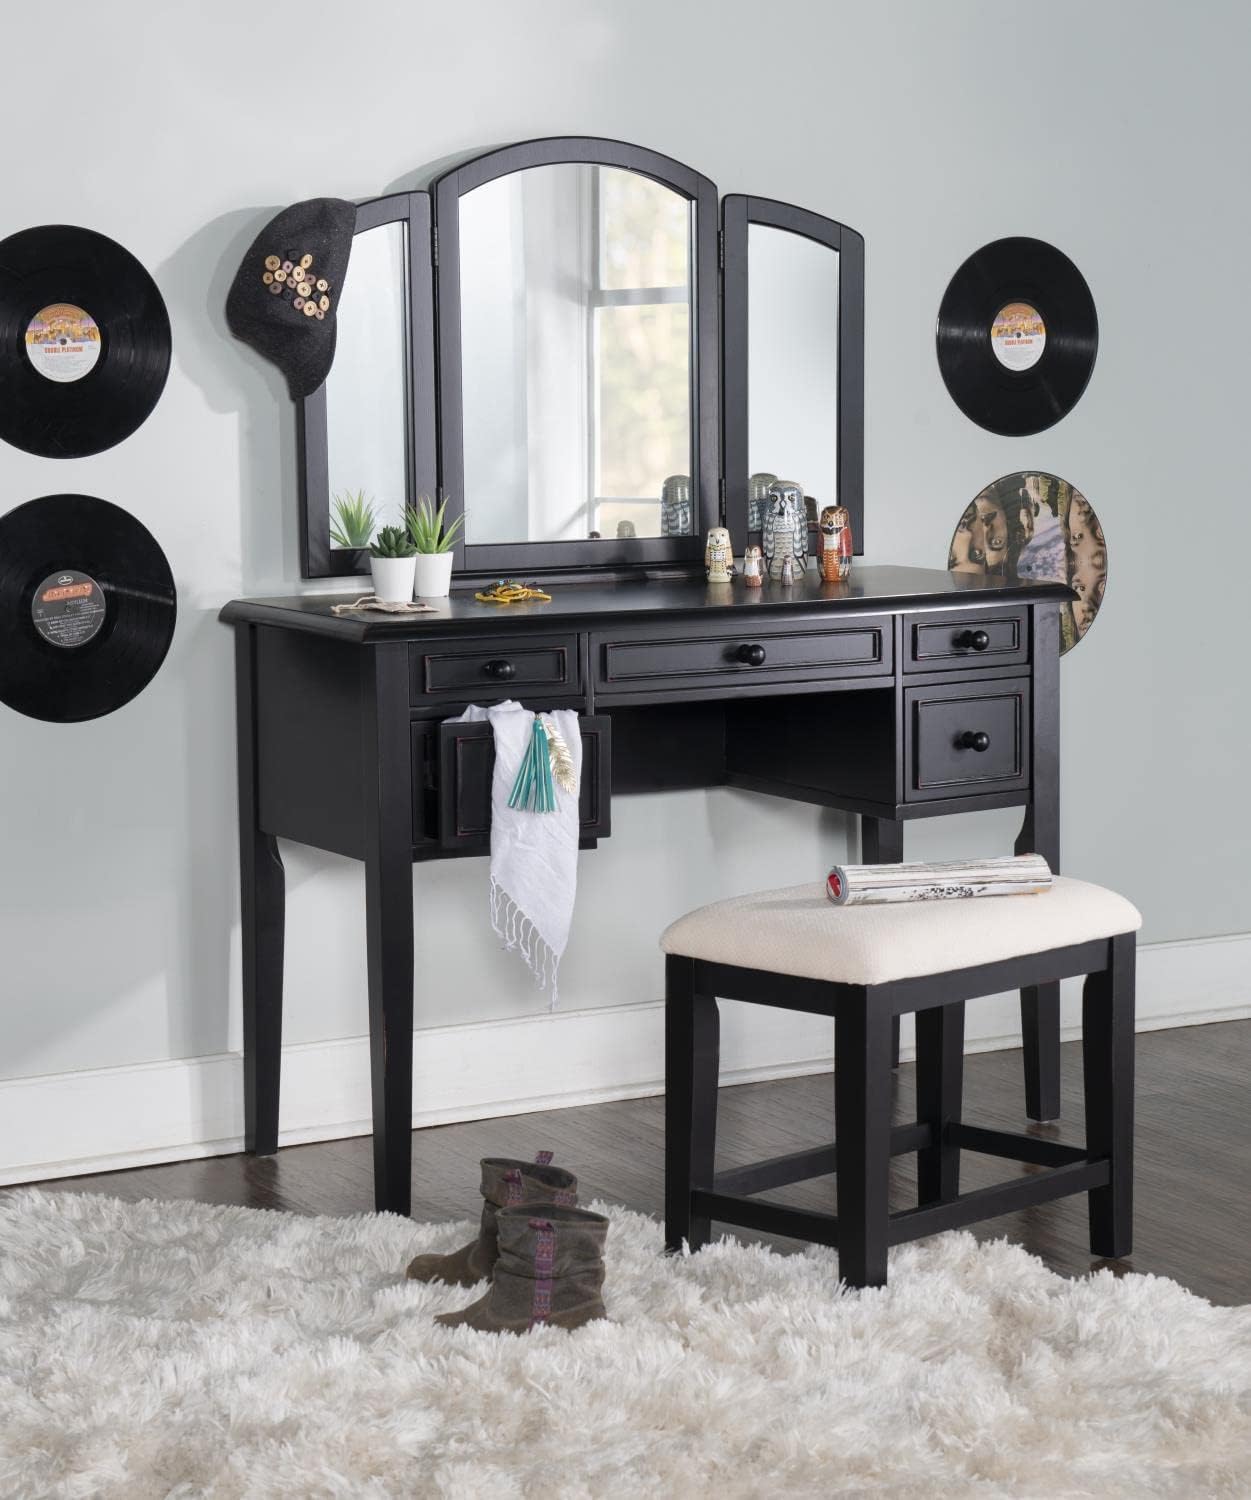 Antique Black With Sand Through Terra Cotta Vanity, Mirror And Bench